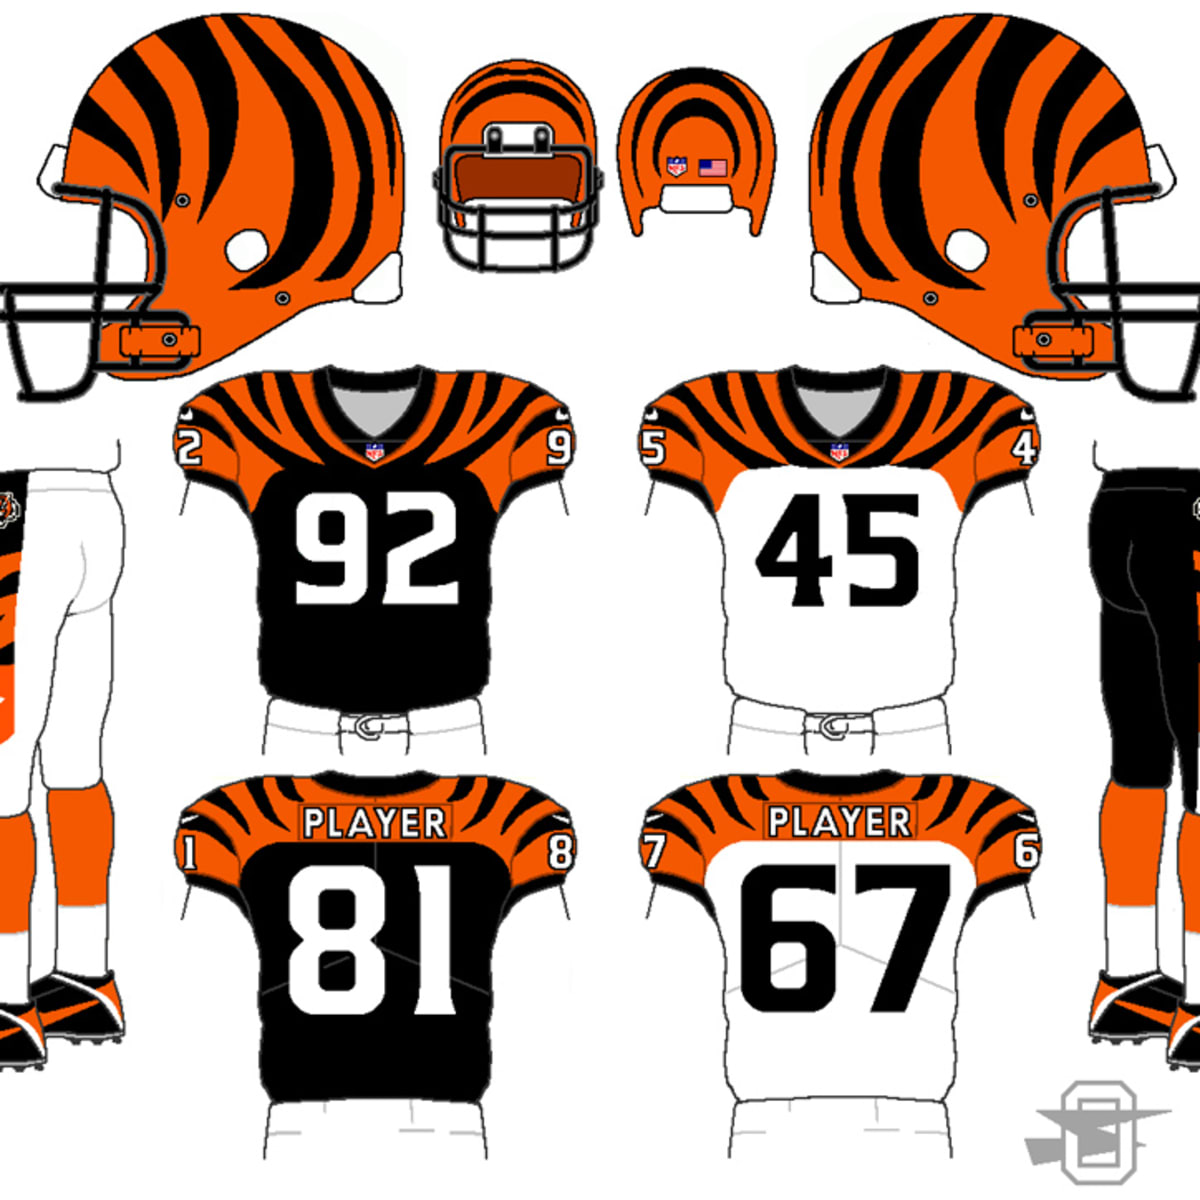 bengals jerseys through the years